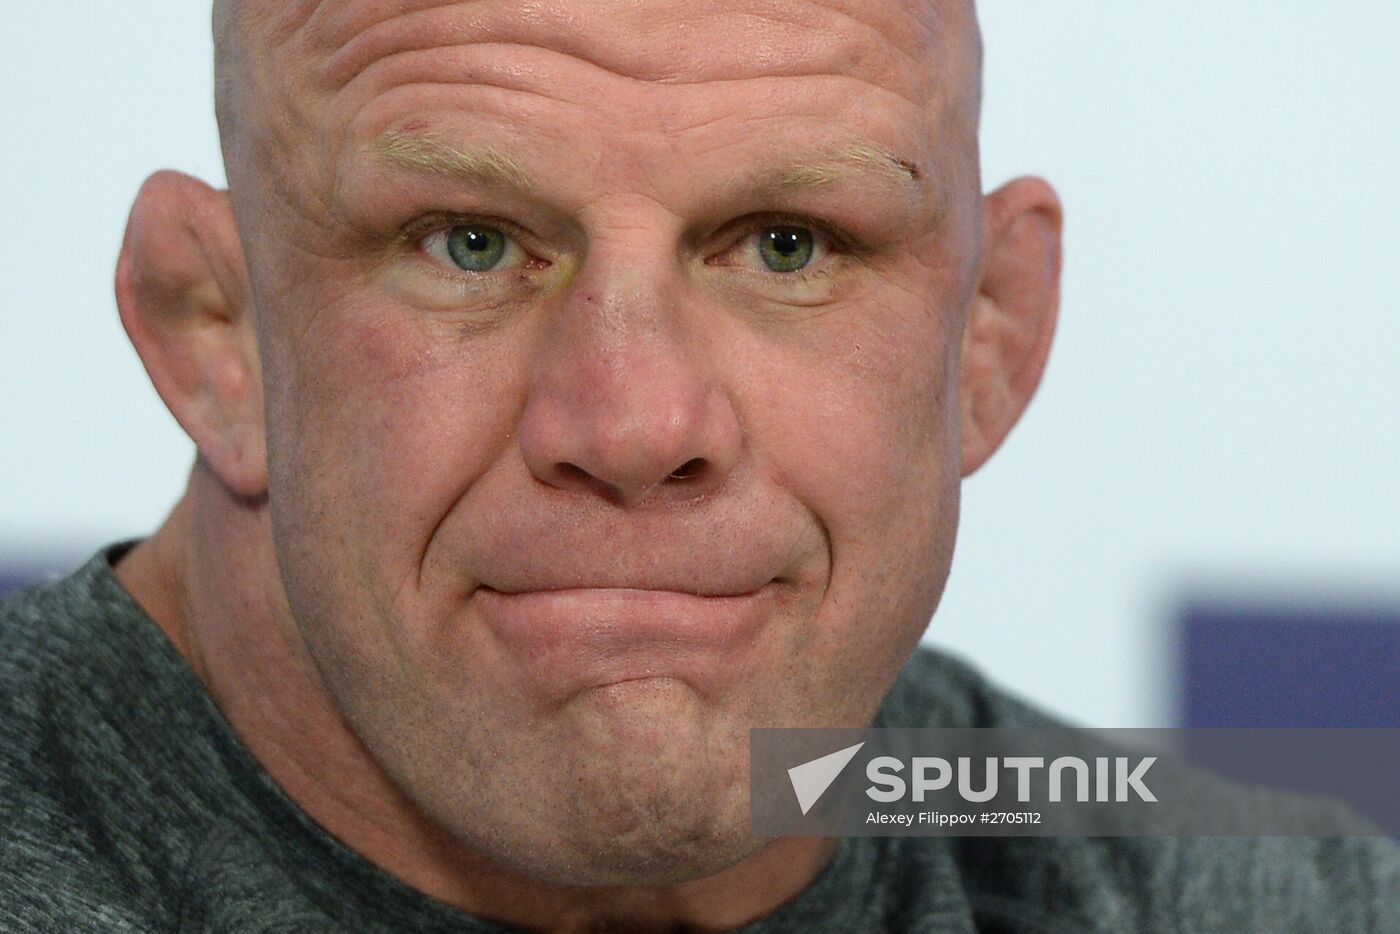 Press conference by Jeff Monson on gaining Russian citizenship